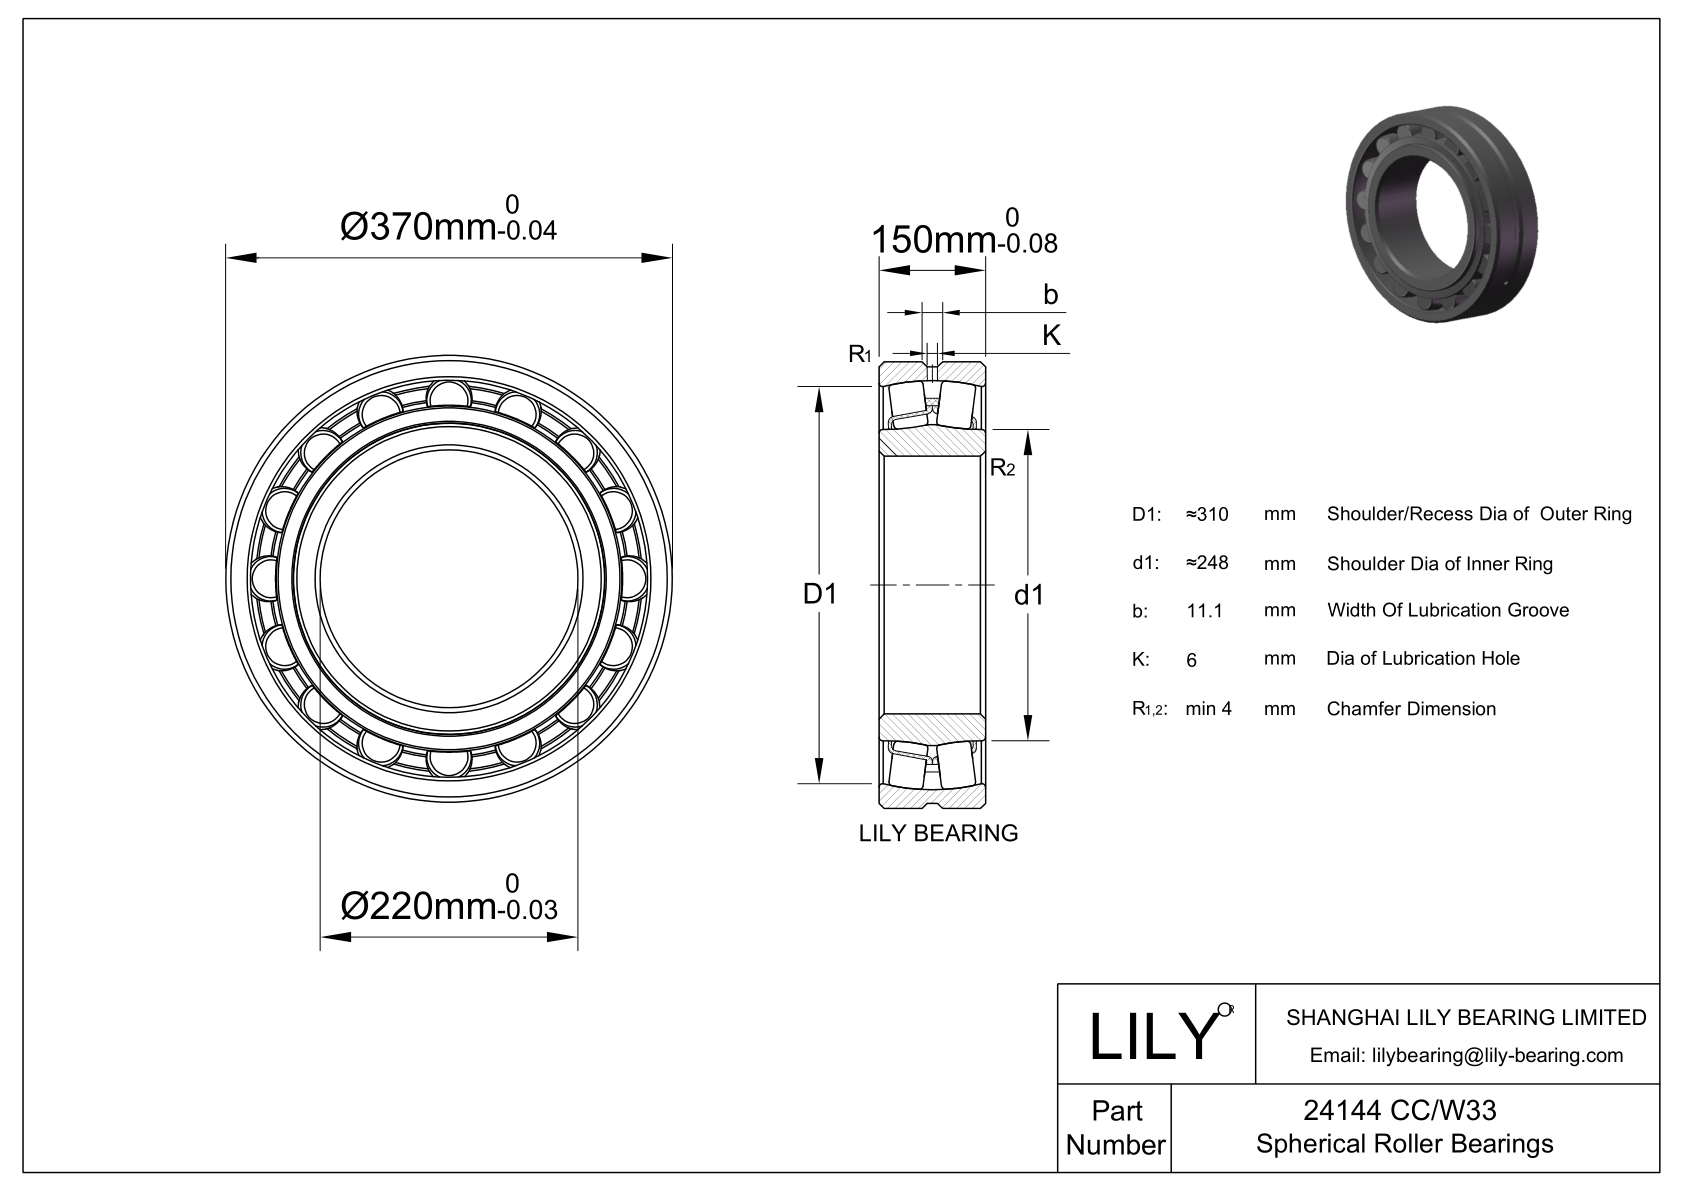 24144 CC/W33 Double Row Spherical Roller Bearing cad drawing